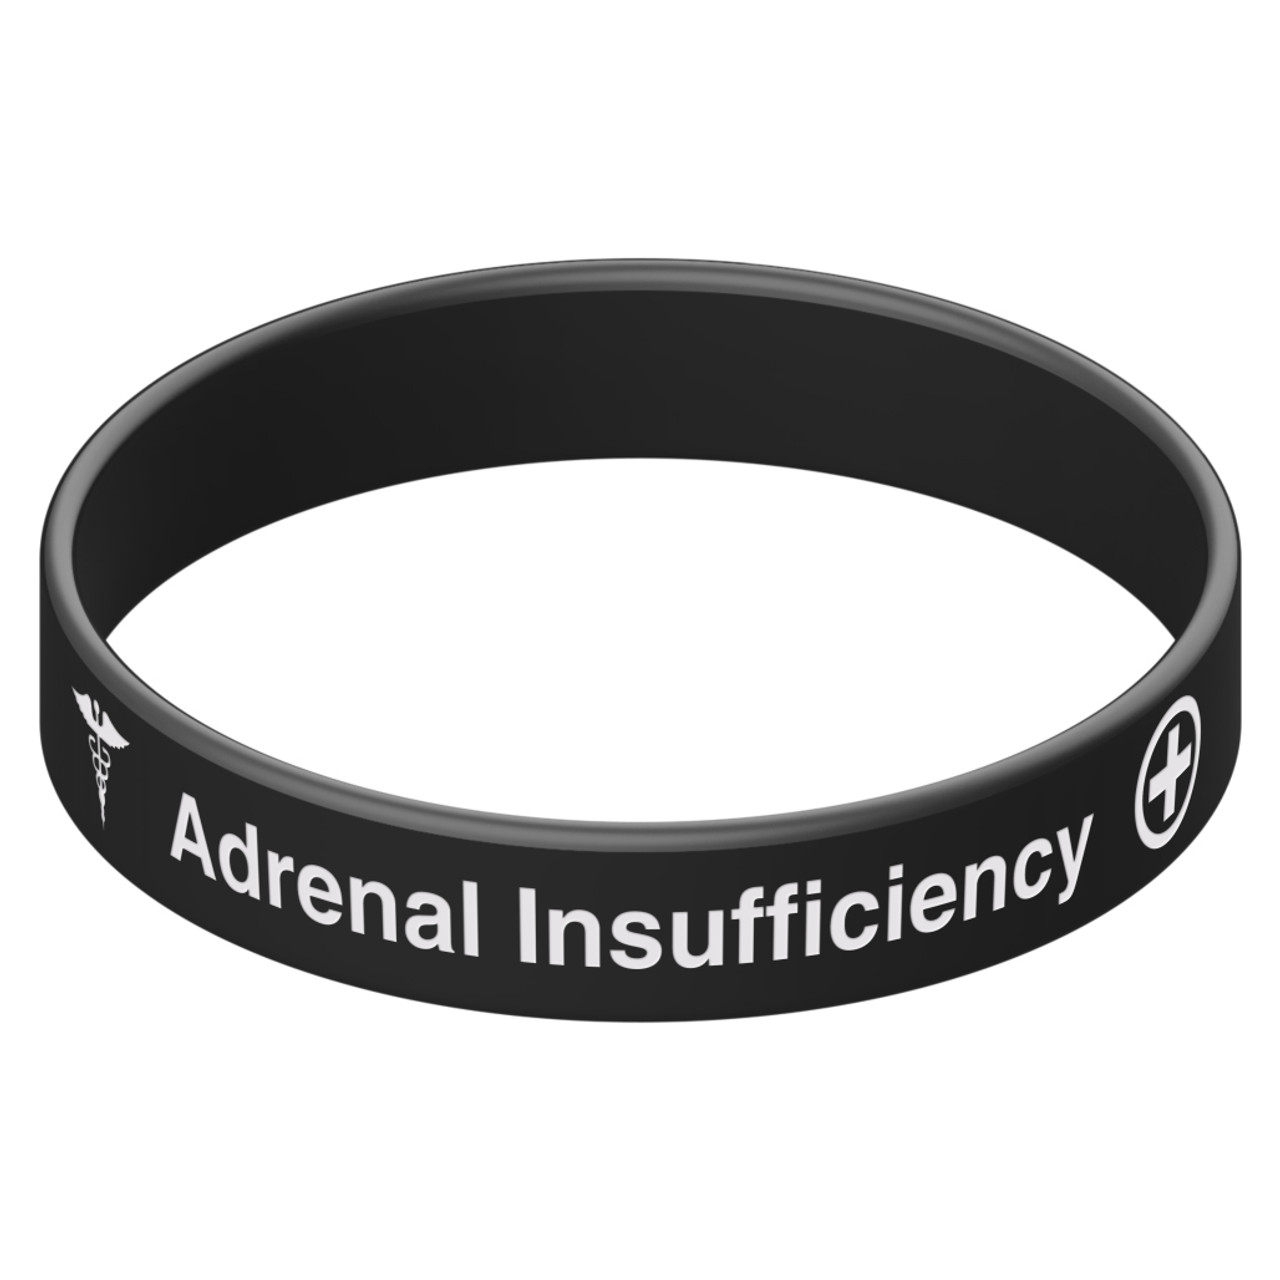 Adrenal Insufficiency Medical ID Alert Bracelet with Embossed Emblem from  Stainless Steel. Style: Classic Wide, Premium Series. -